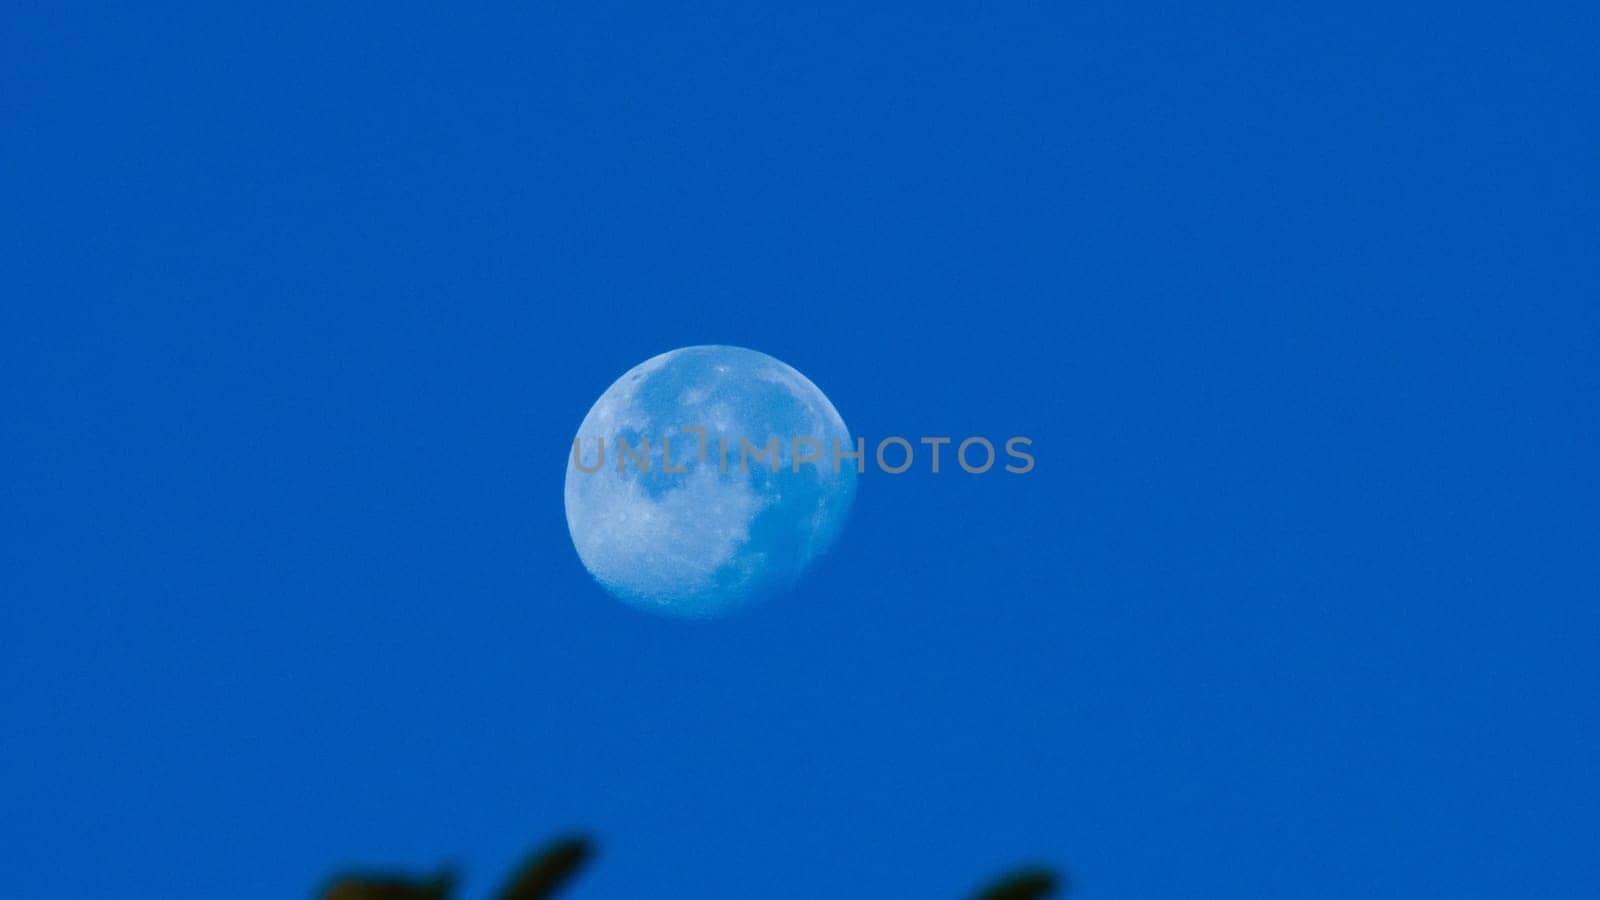 A beautiful moon was seen in the clear blue sky. Close-up of the moon in a light blue sky.